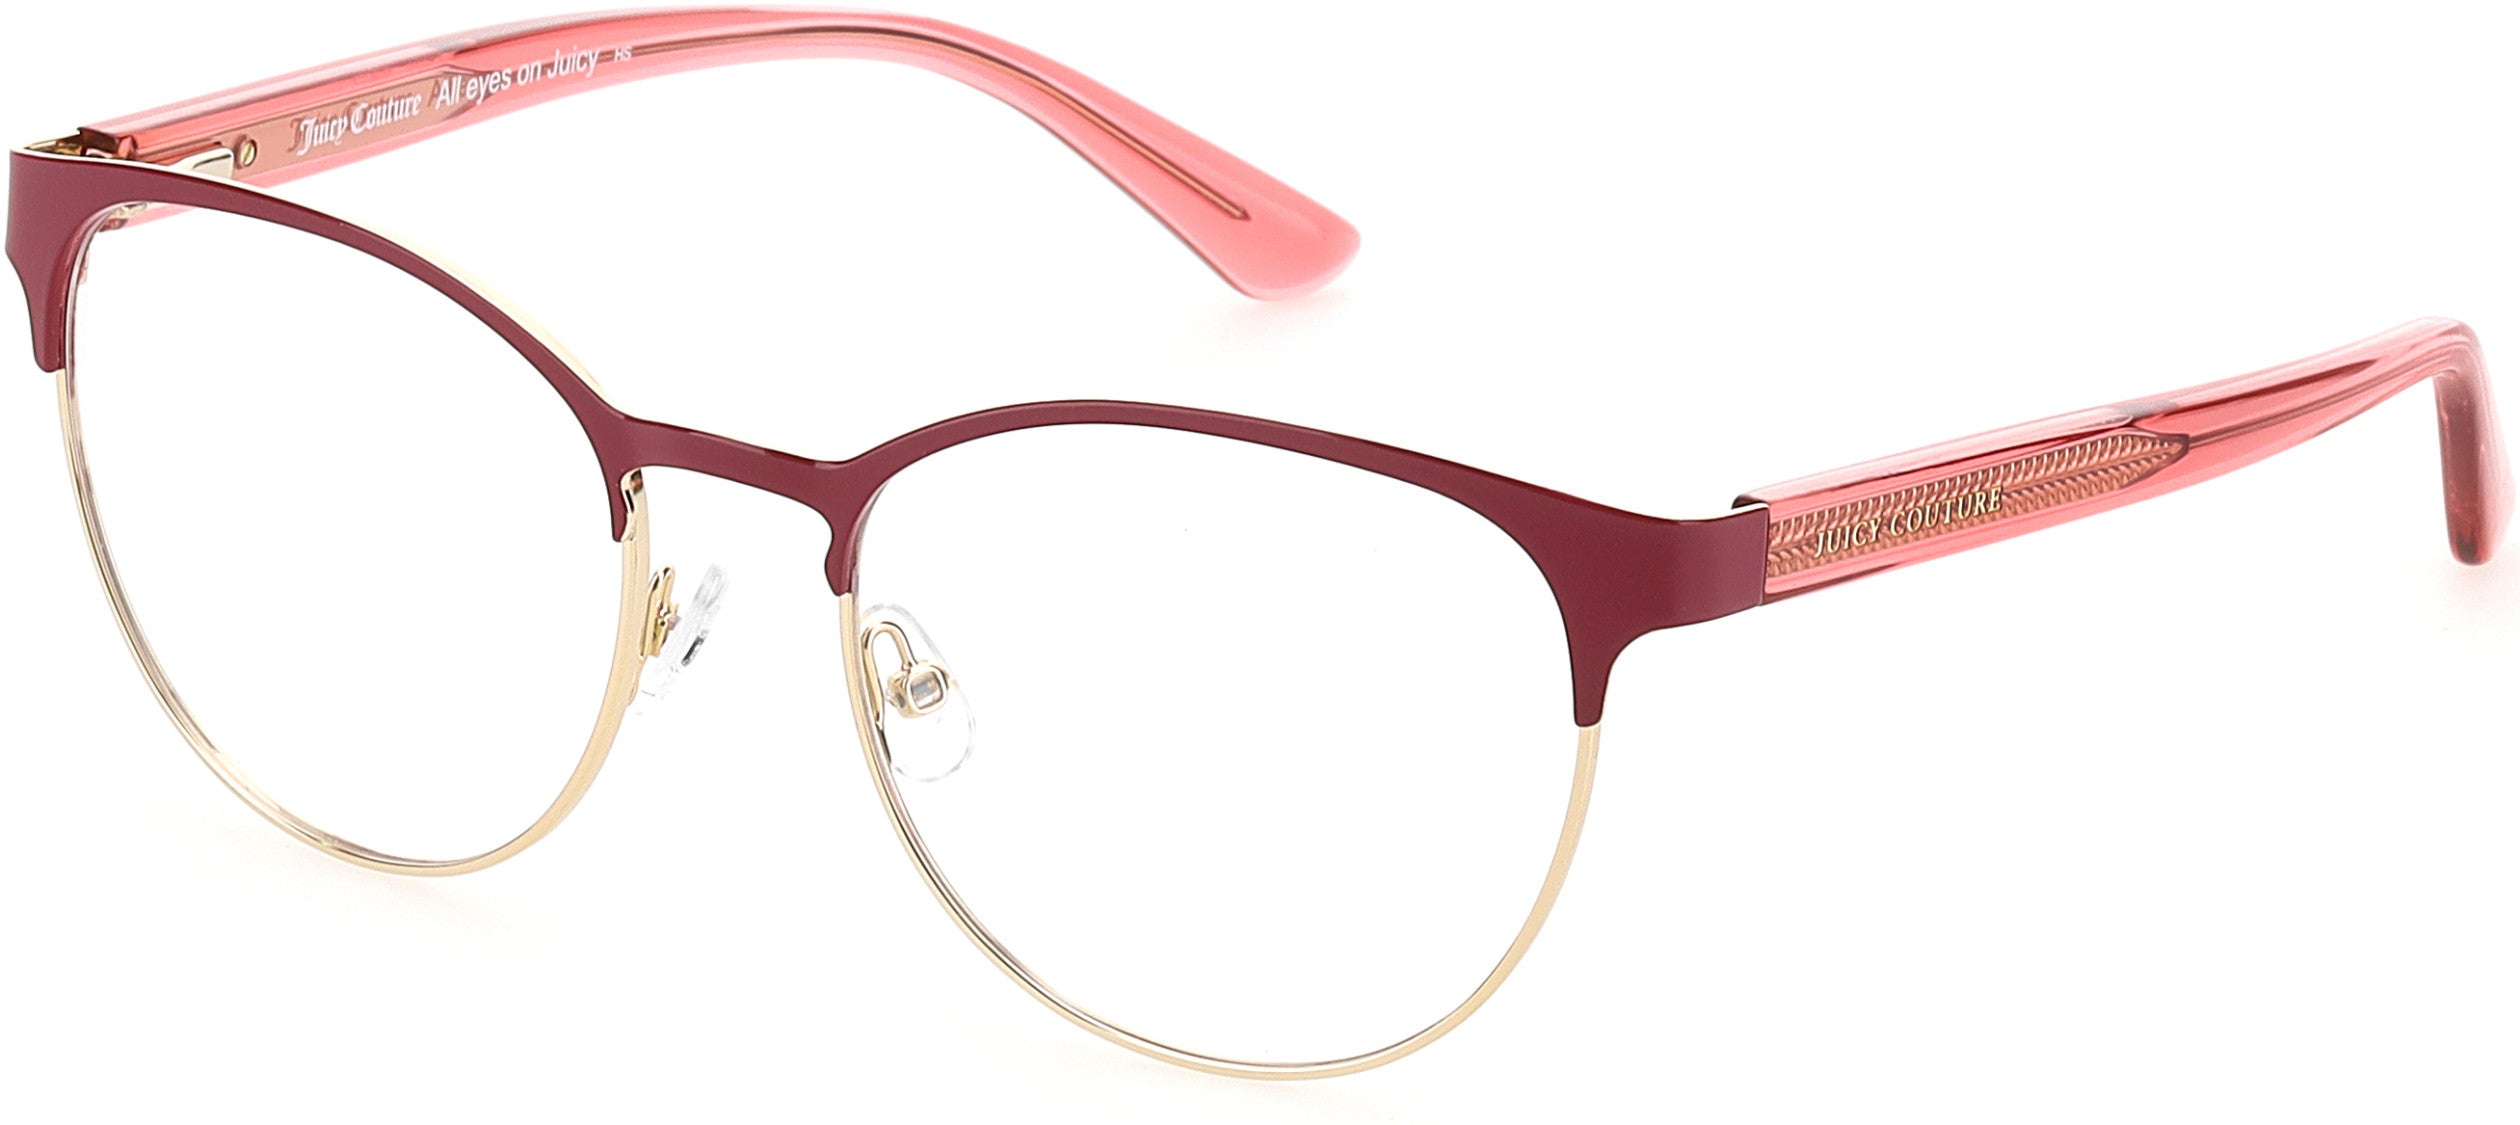 Juicy Couture Juicy 203/G Oval Modified Eyeglasses 08CQ-08CQ  Cherry (00 Demo Lens)